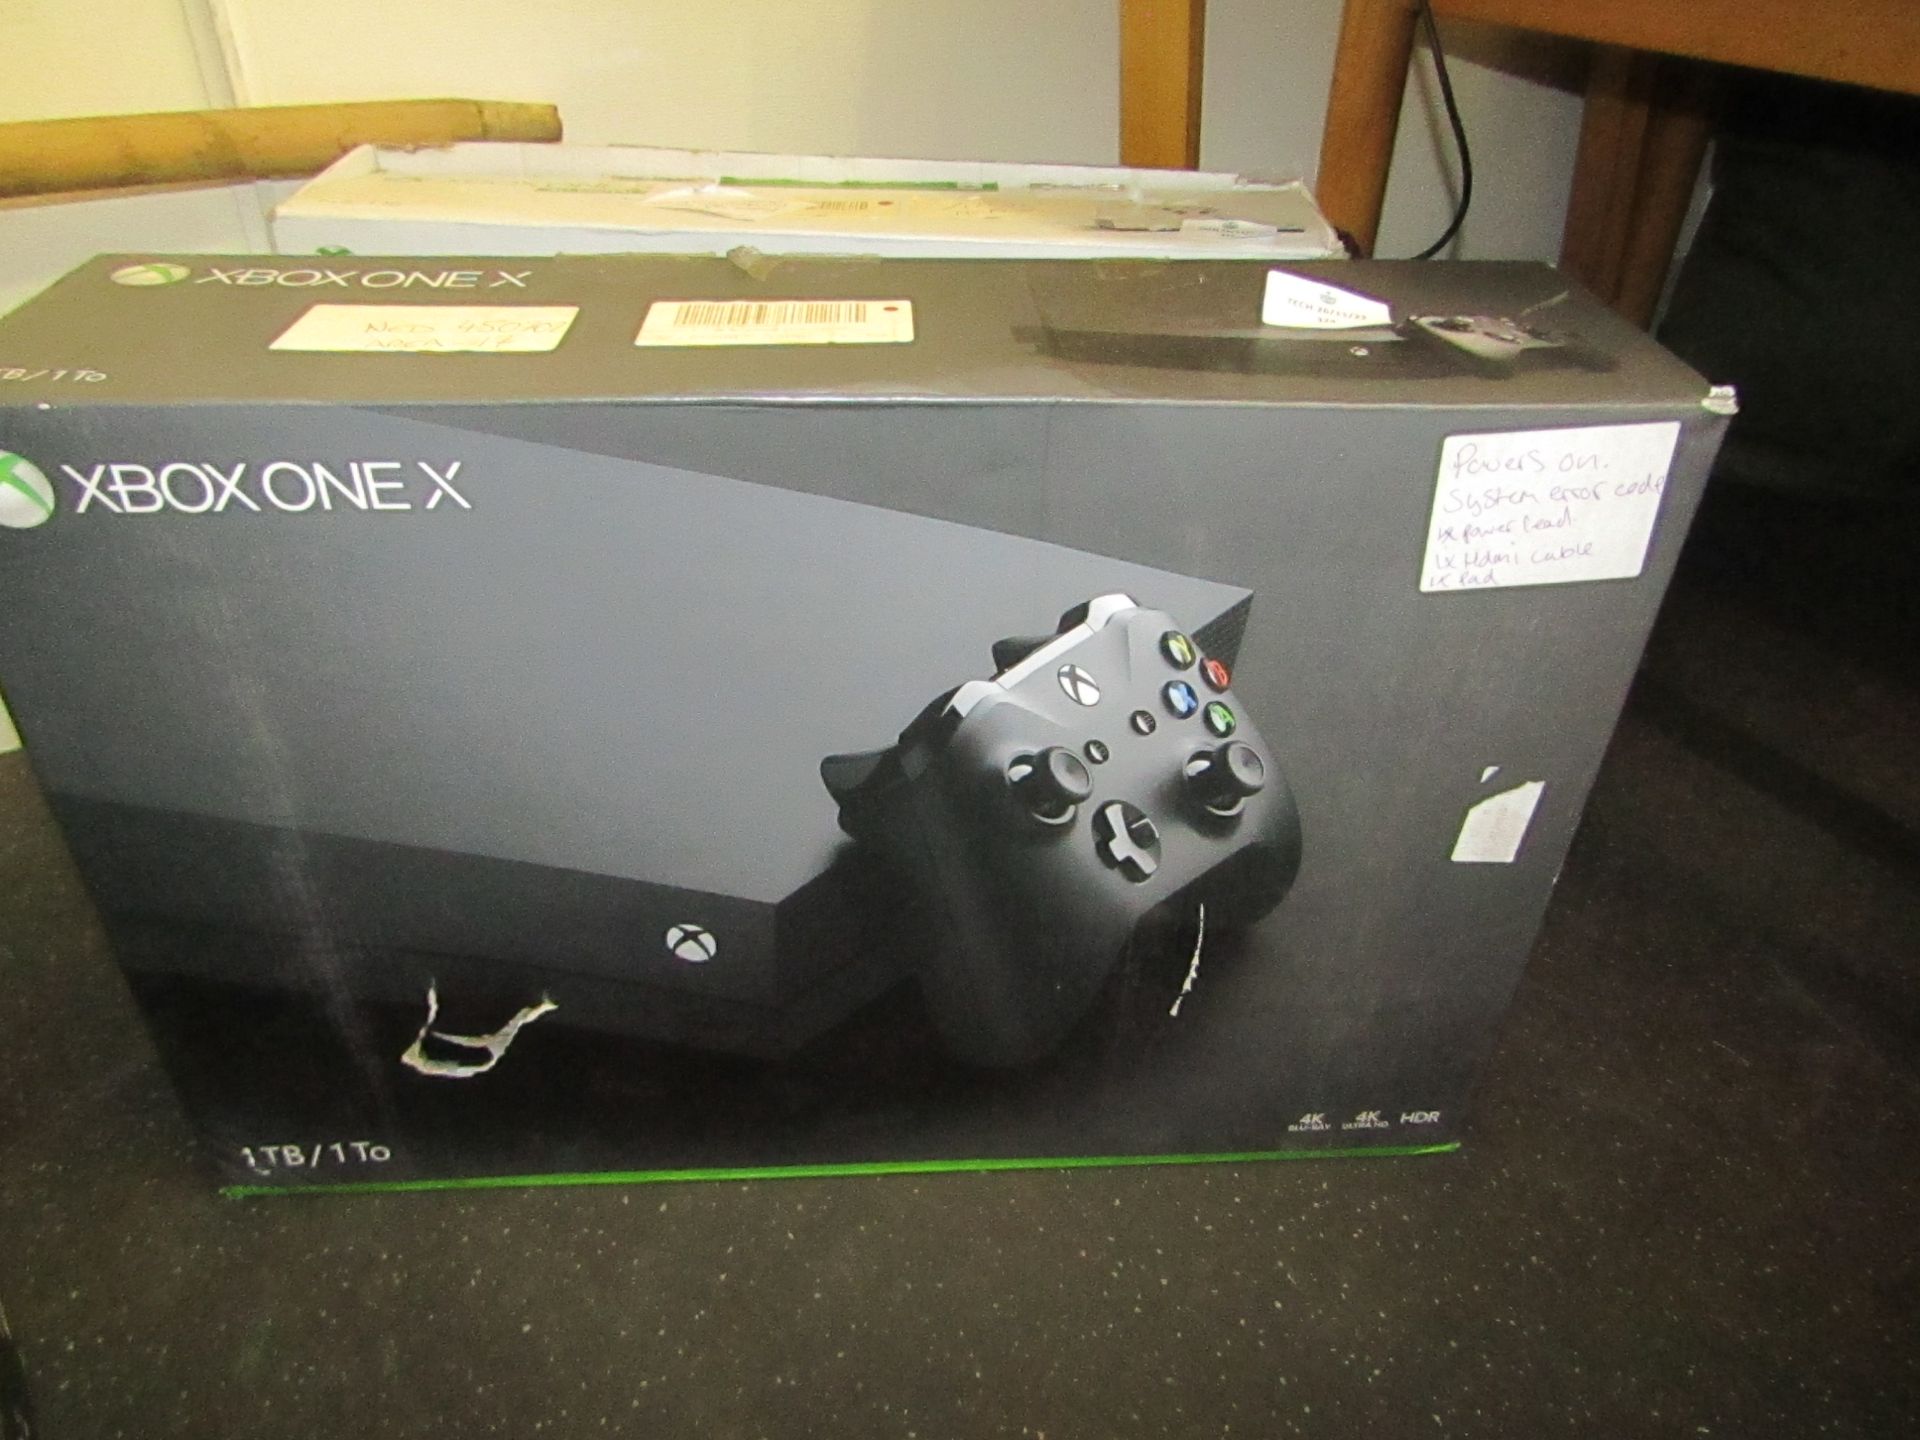 XboxOne X 1Tb games console, powers on but has a system fault, comes with power cable, HDMI lead and